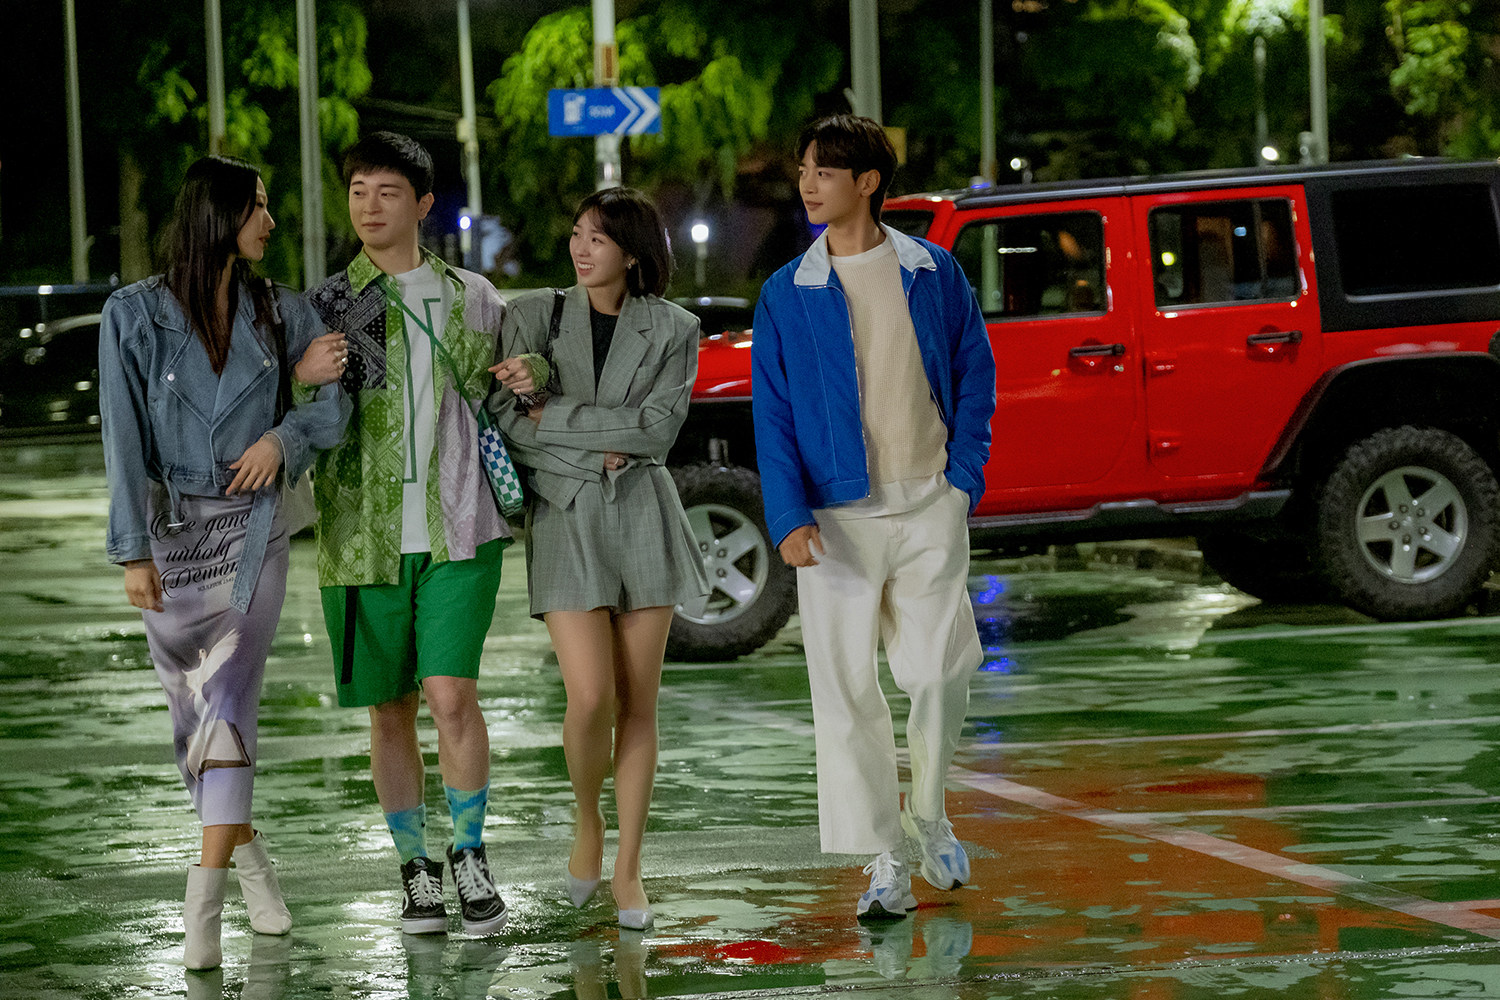 (From left) Park Hee-jung, Lee Sang-eun, Chae Soo-bin and Minho in a still from The Fabulous.